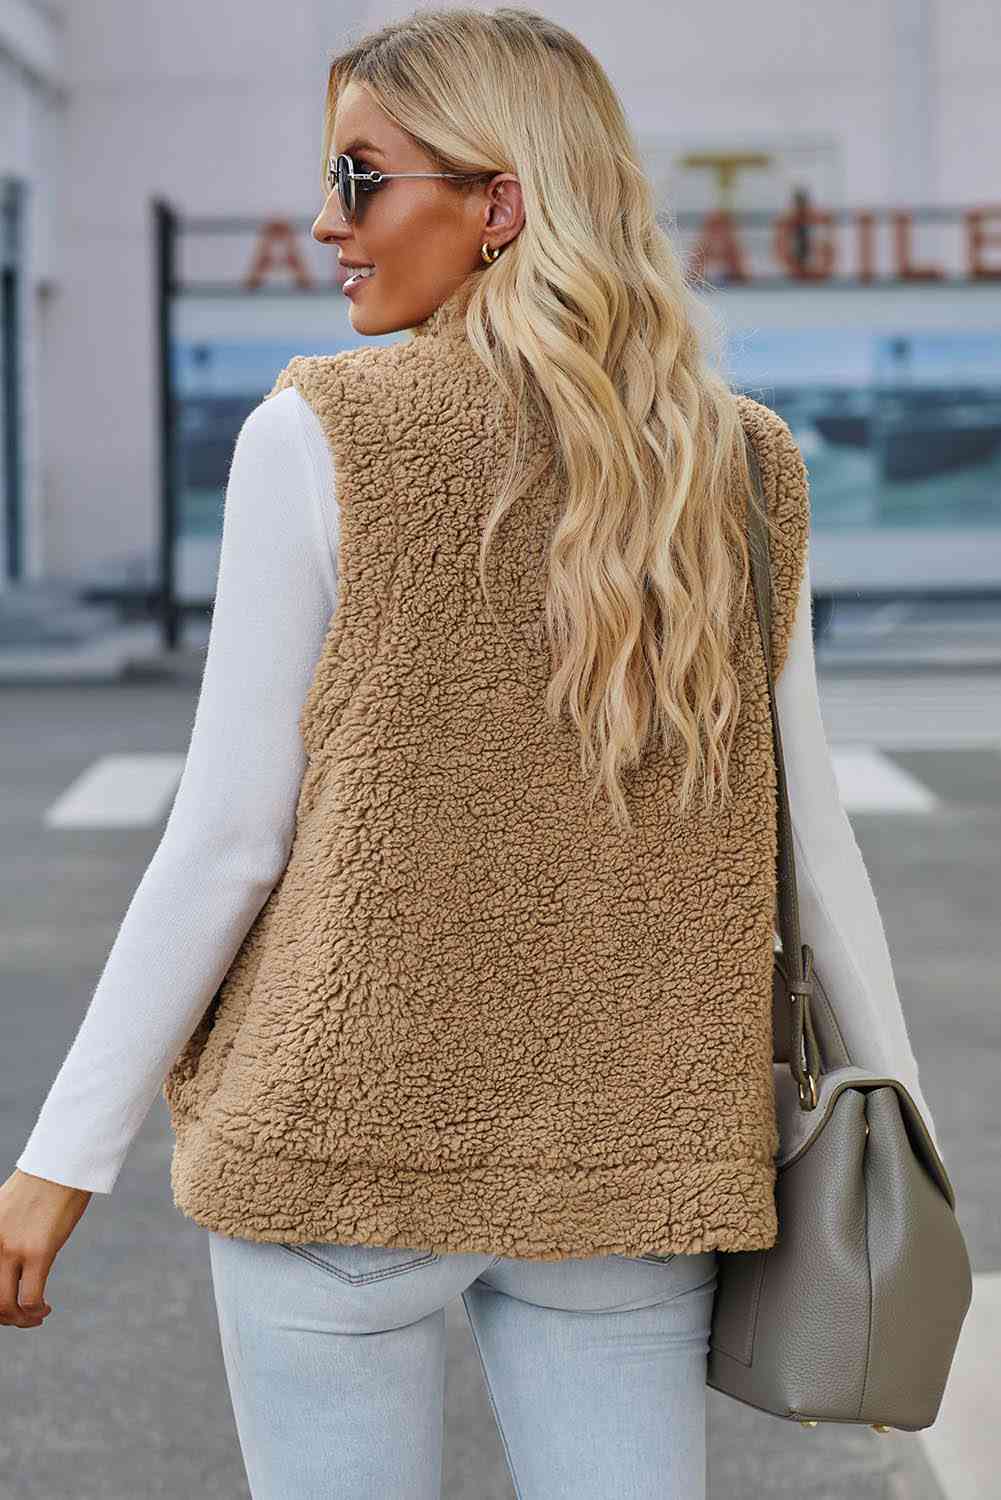 Snap Down Vest with Pockets - Women’s Clothing & Accessories - Vests - 2 - 2024